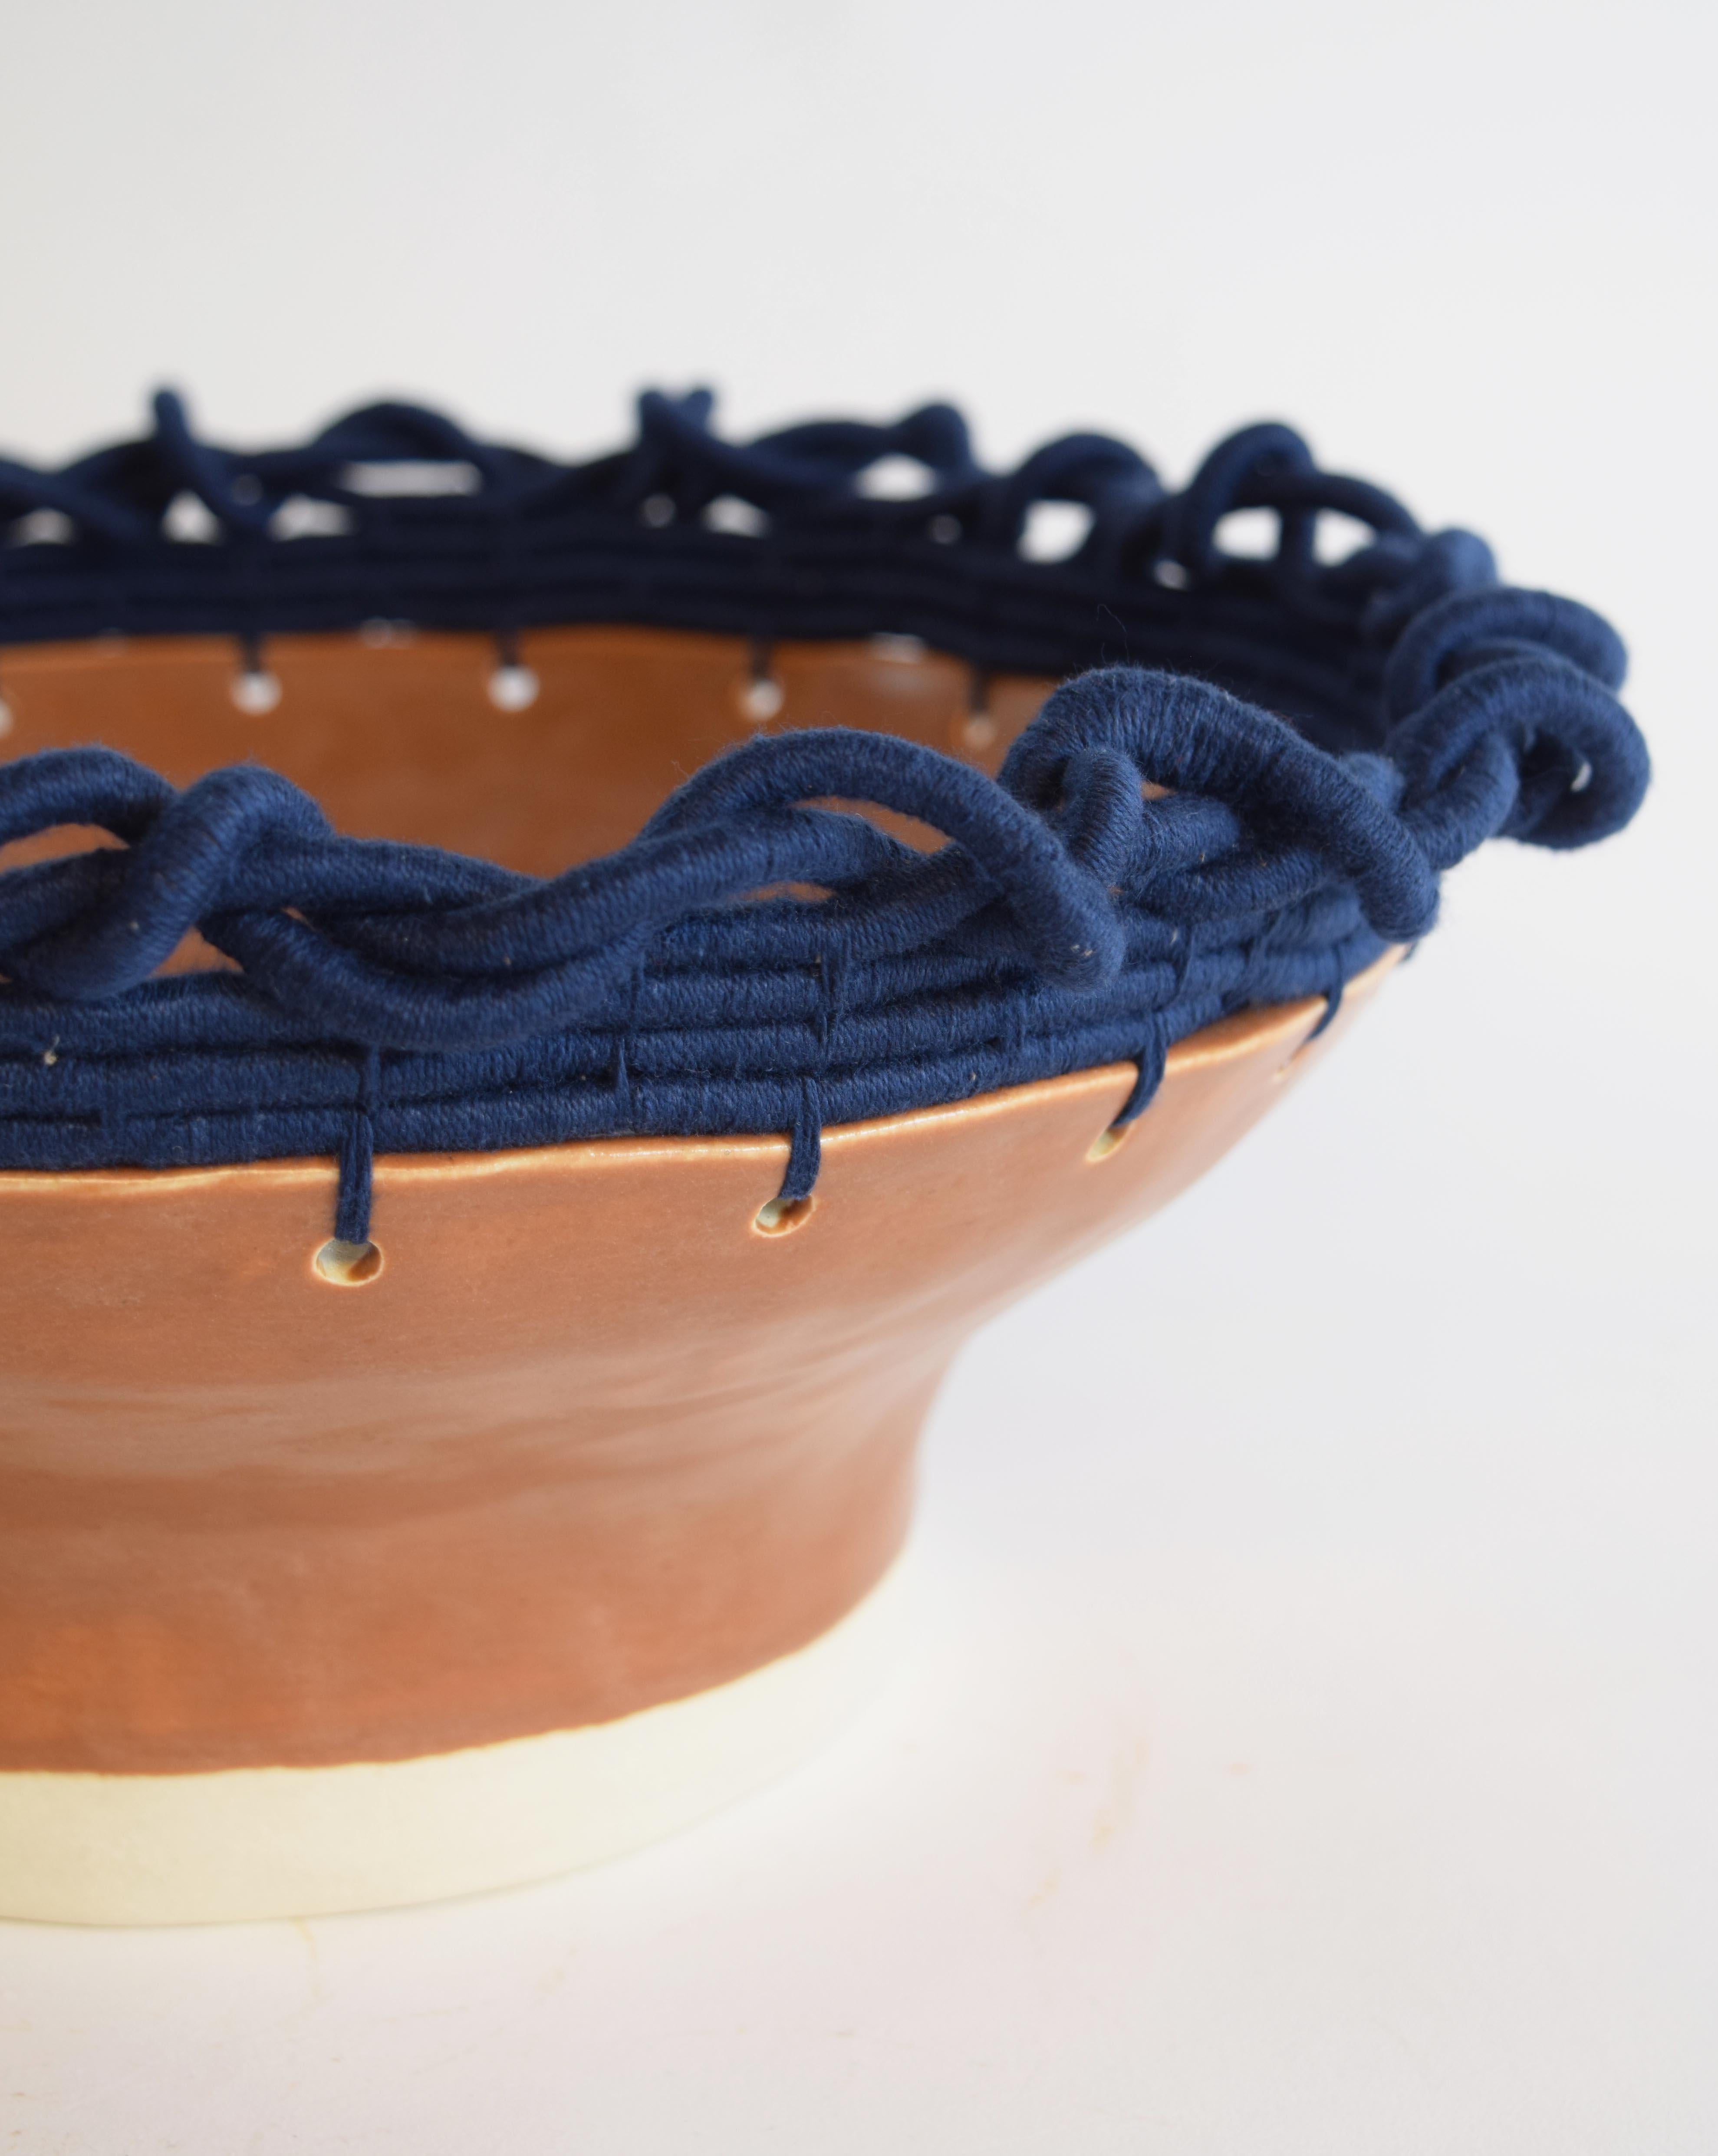 American One of a Kind Handmade Ceramic Bowl #803, Brown Glaze & Woven Navy Blue Cotton For Sale